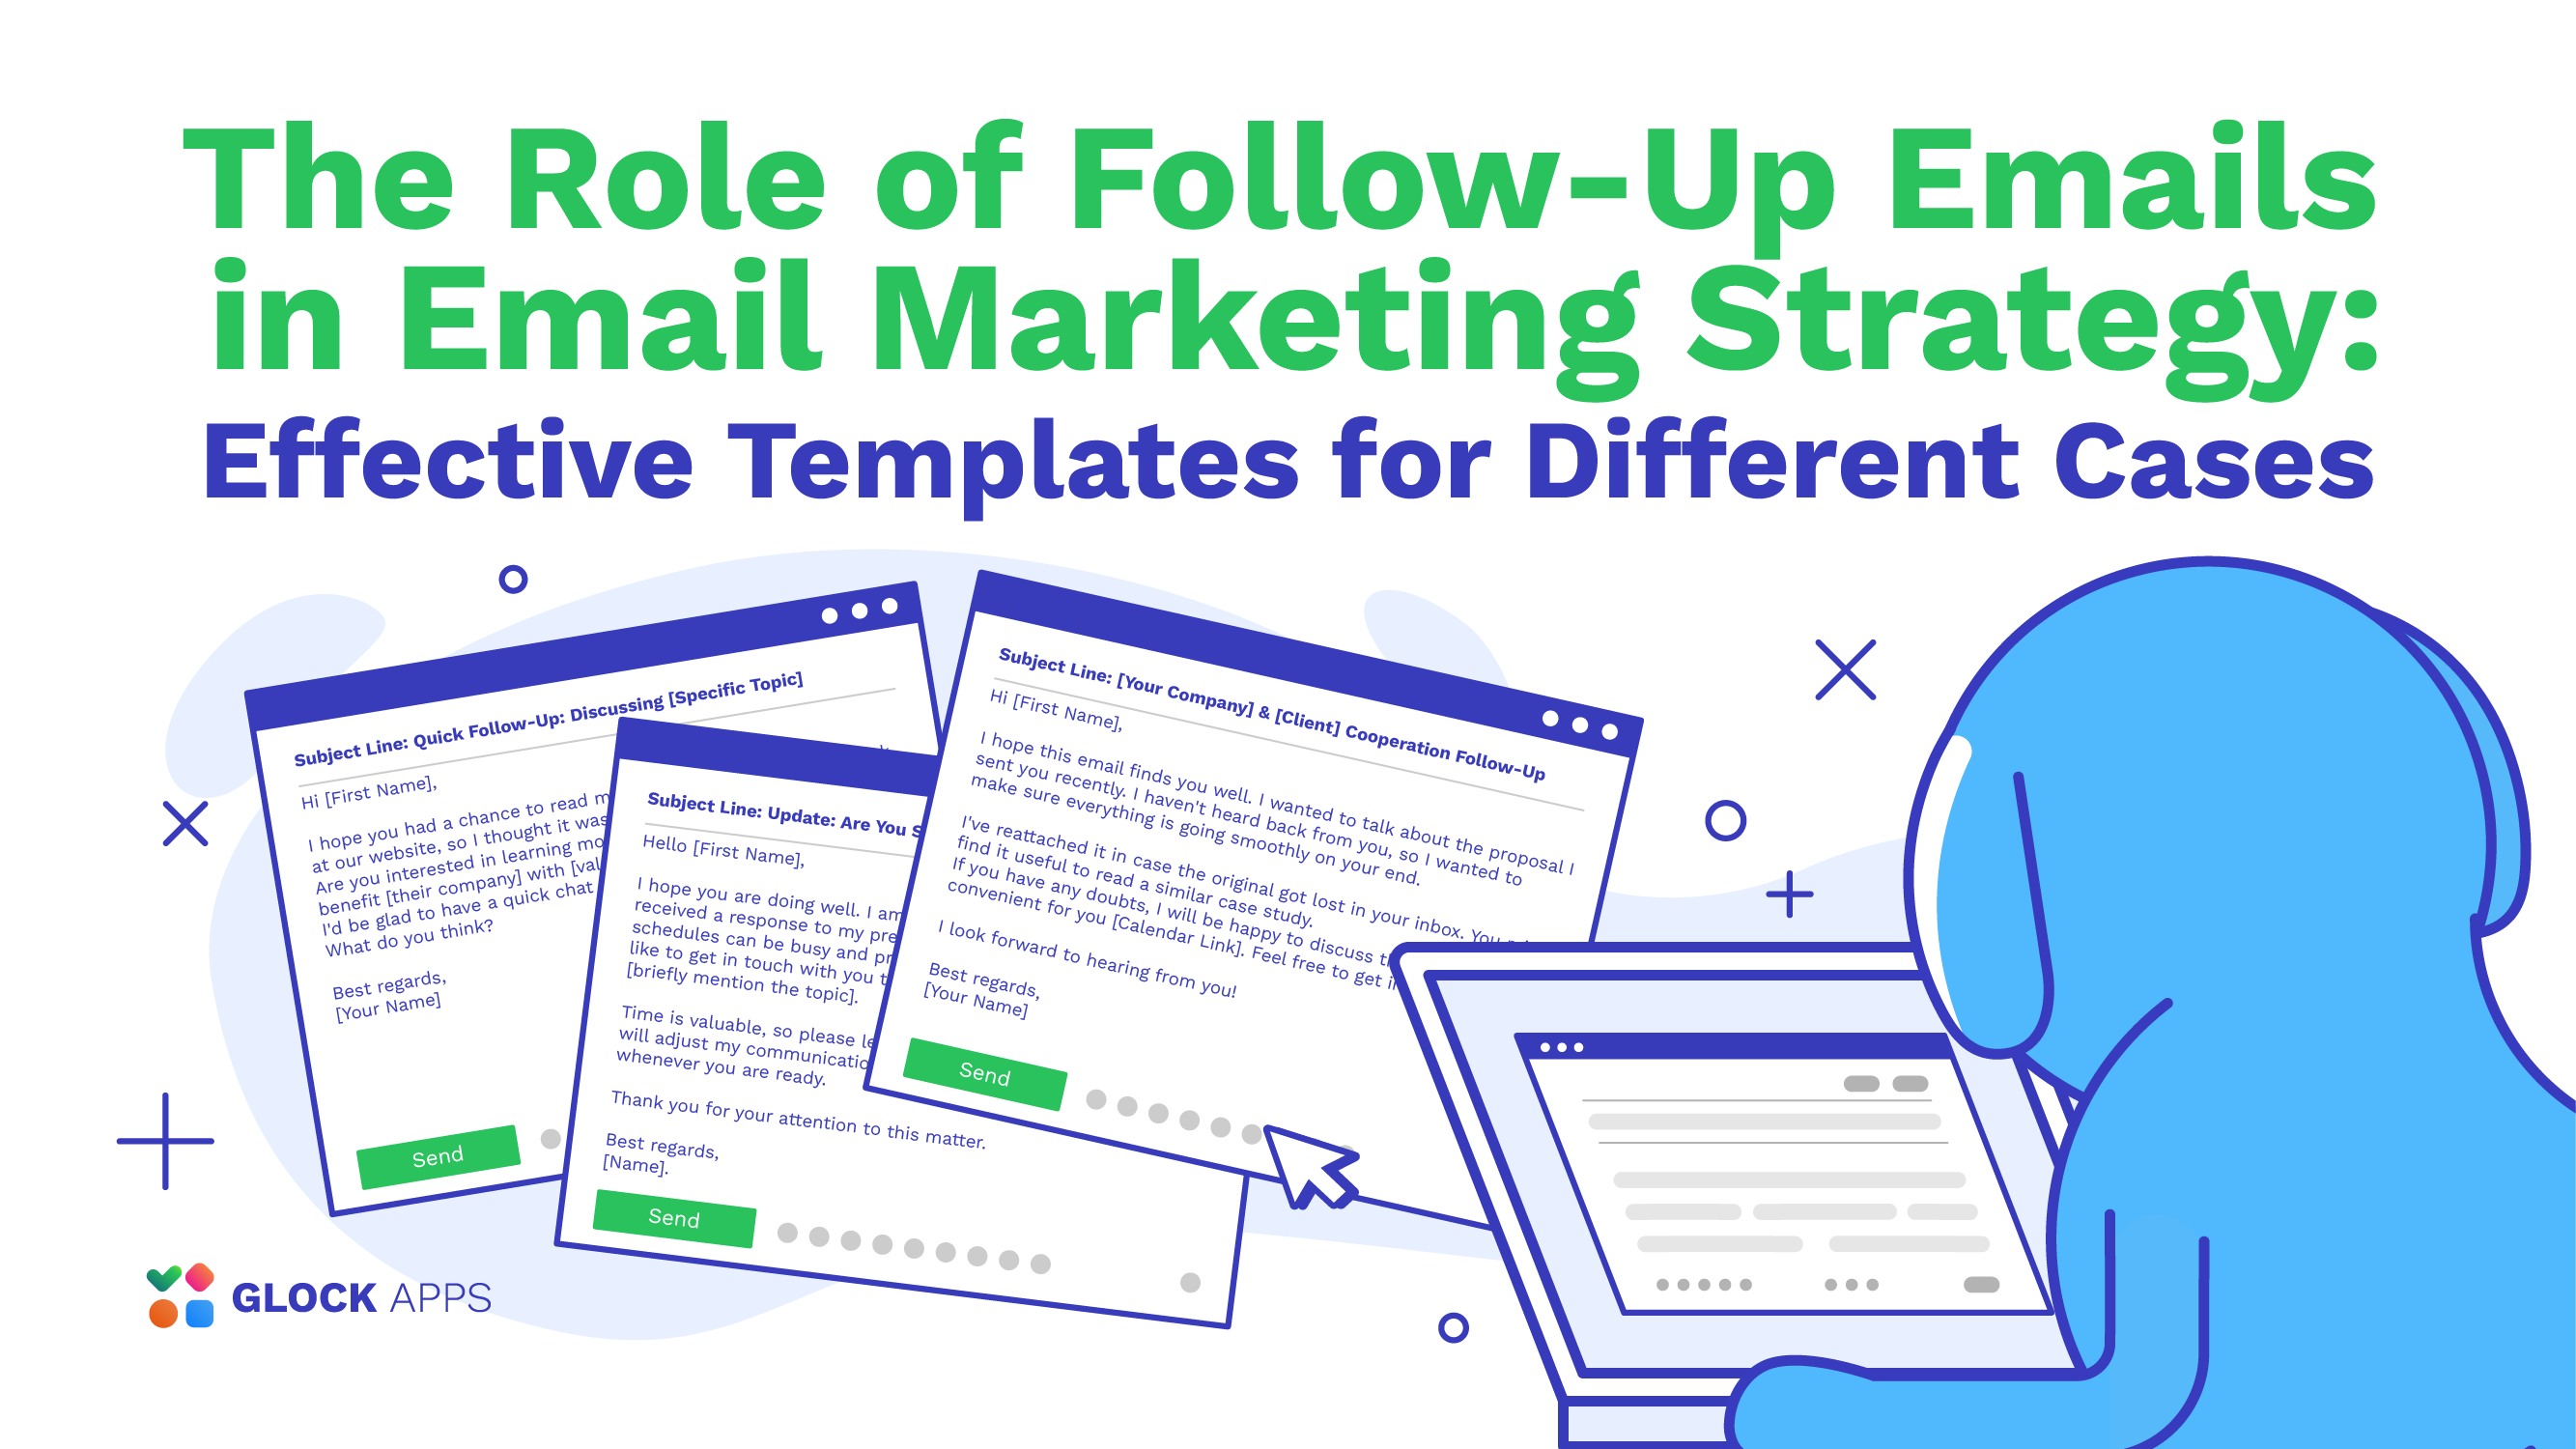 Follow-Up Emails in Email Marketing Strategy